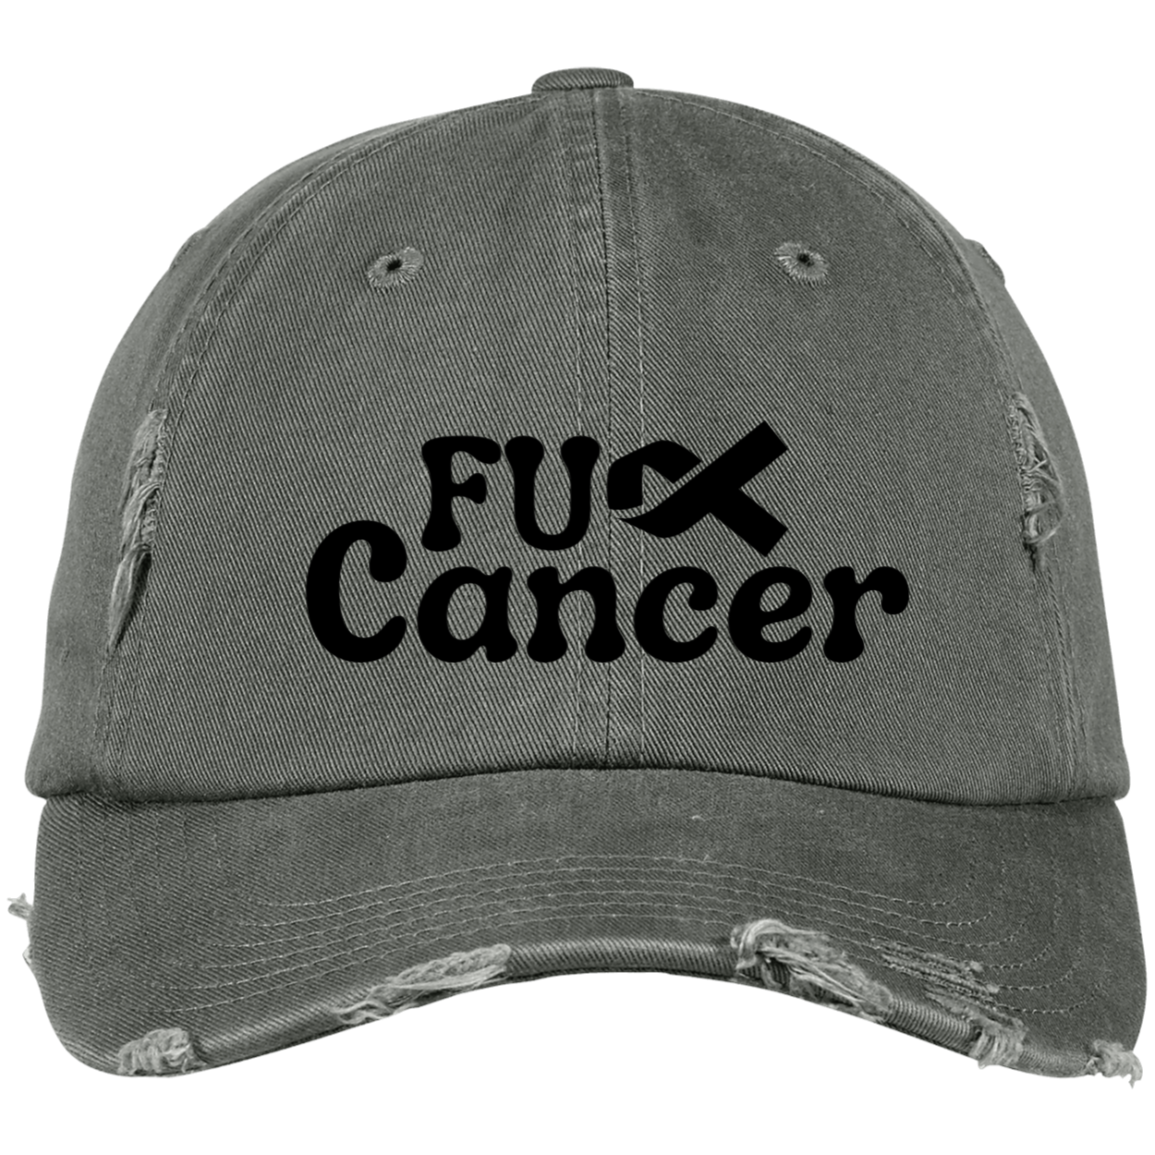 F Cancer Embroidered Distressed Dad Cap